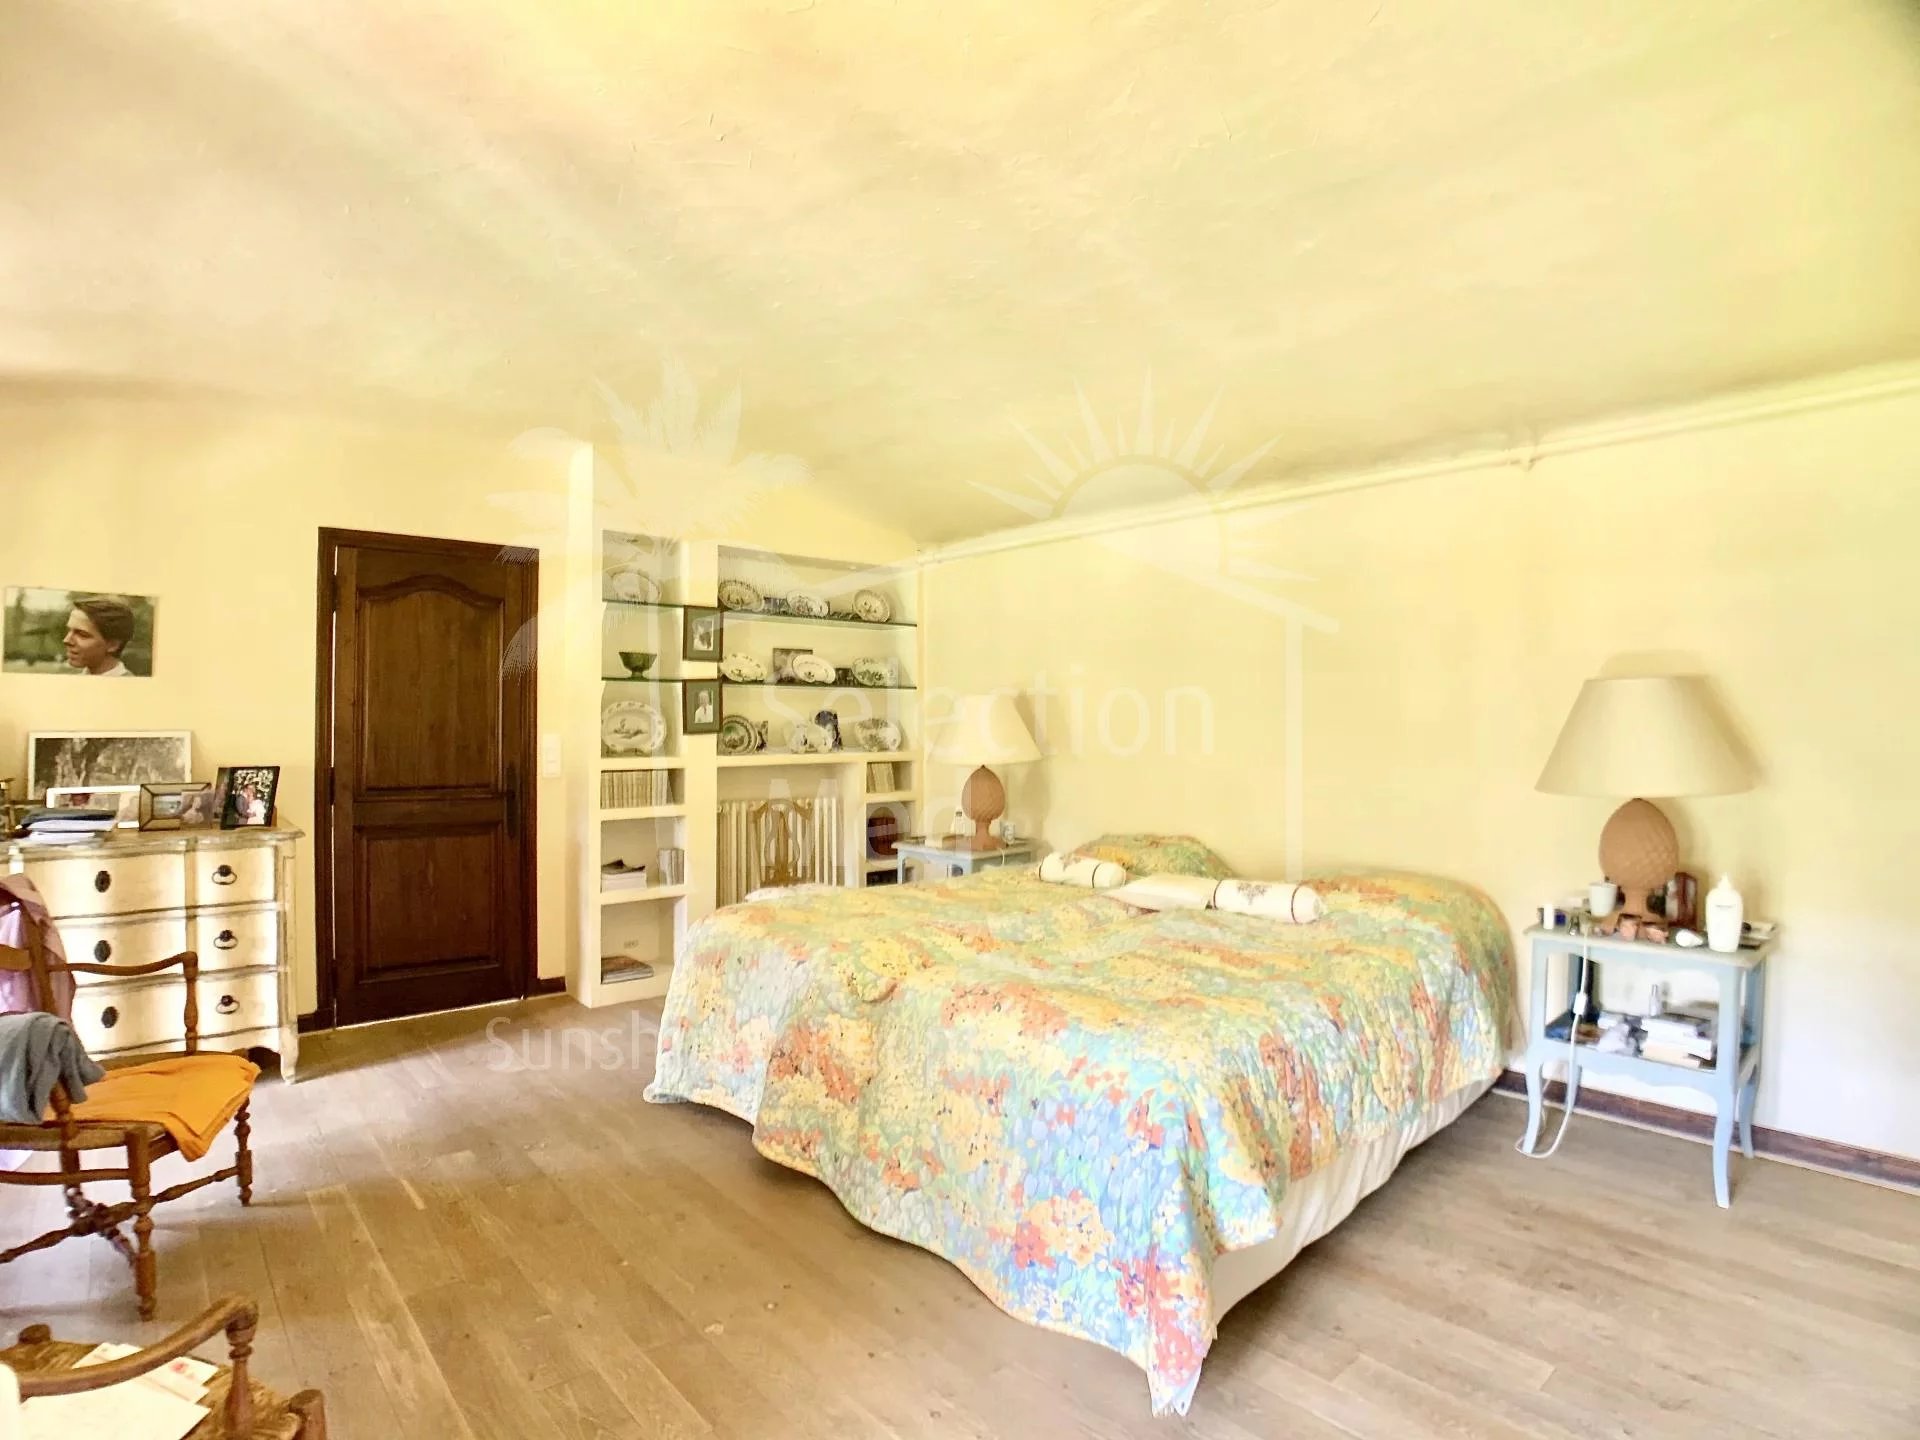 Provençal property in quiet location with open views on Grasse